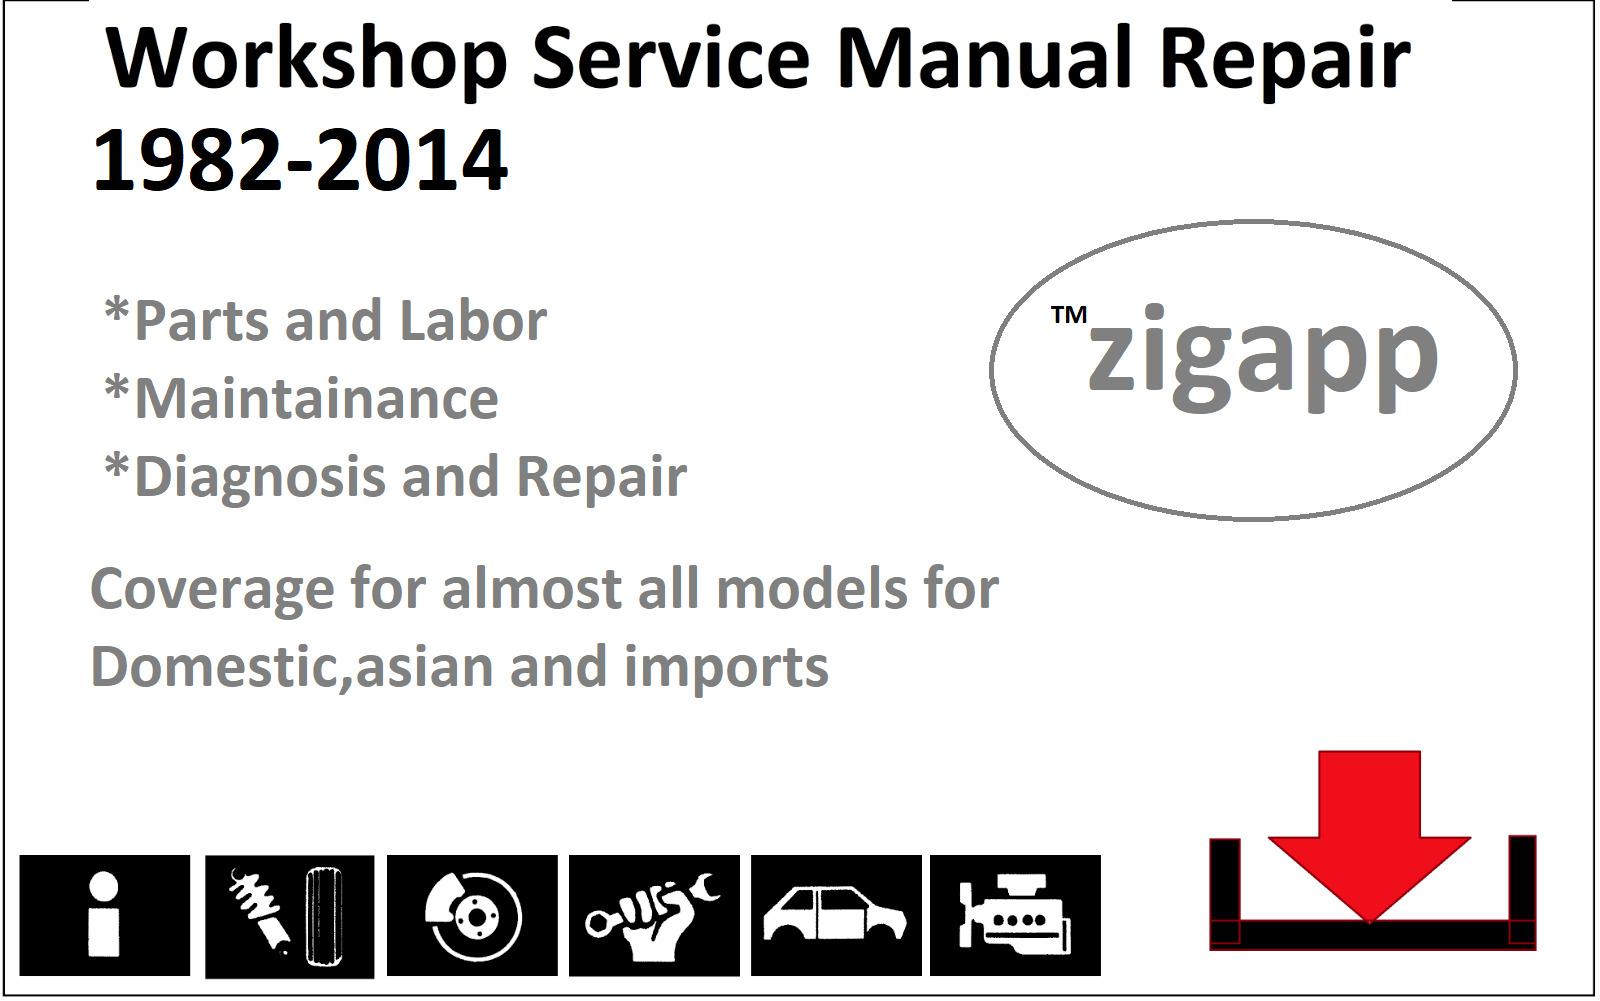 Auto Car Workshop Service Manual Repair up to 2014 Full Coverage